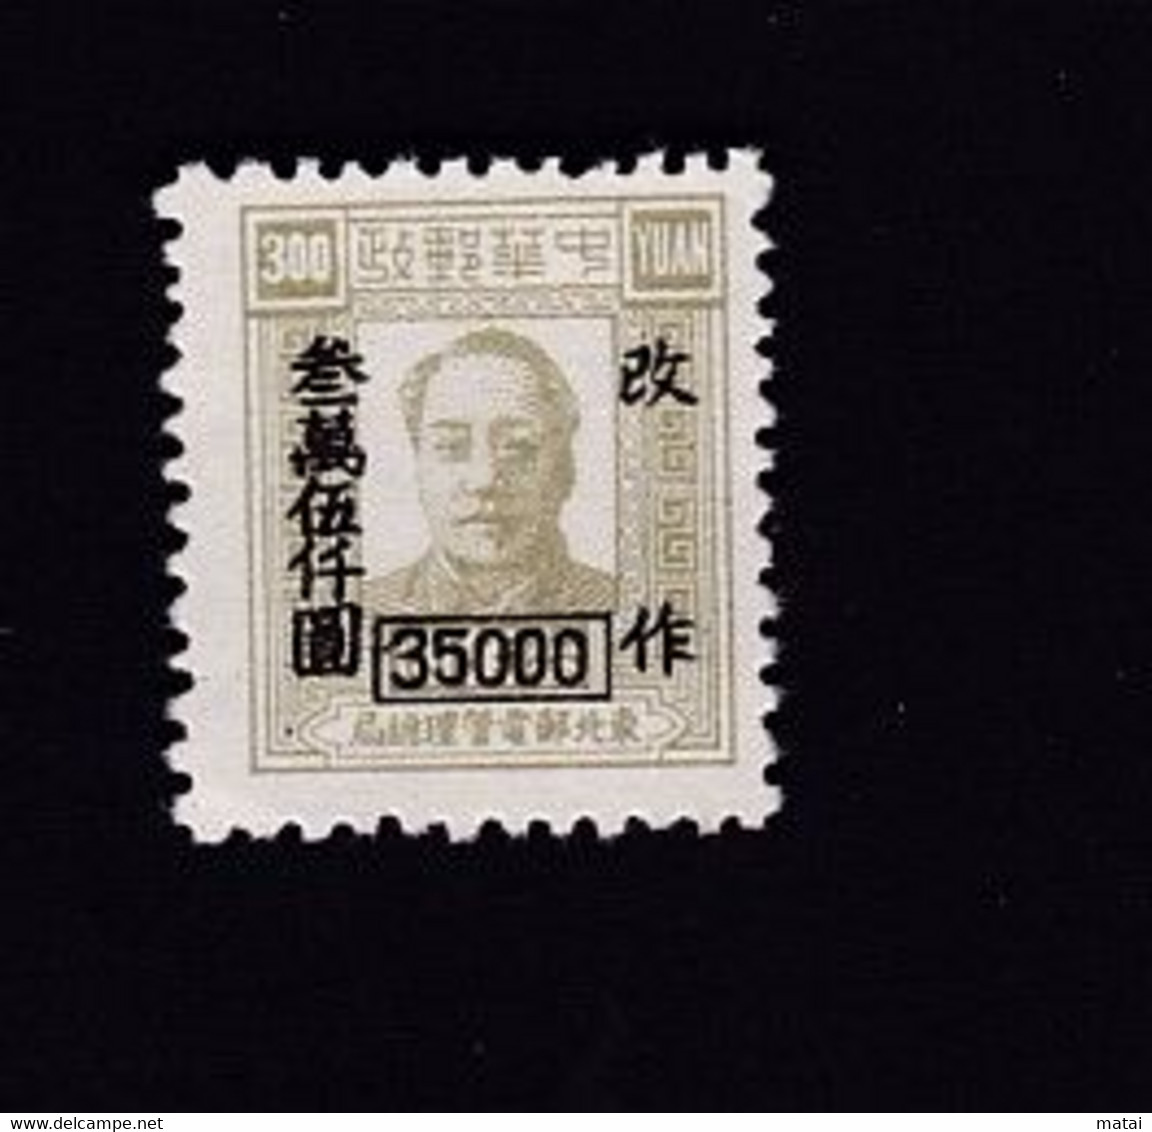 CHINA CINE CINA  THE CHINESE PEOPLE'S REVOLUTIONARY WAR PERIOD NORTHEAST PEOPLE'S POSTS STAMP - Centraal-China 1948-49